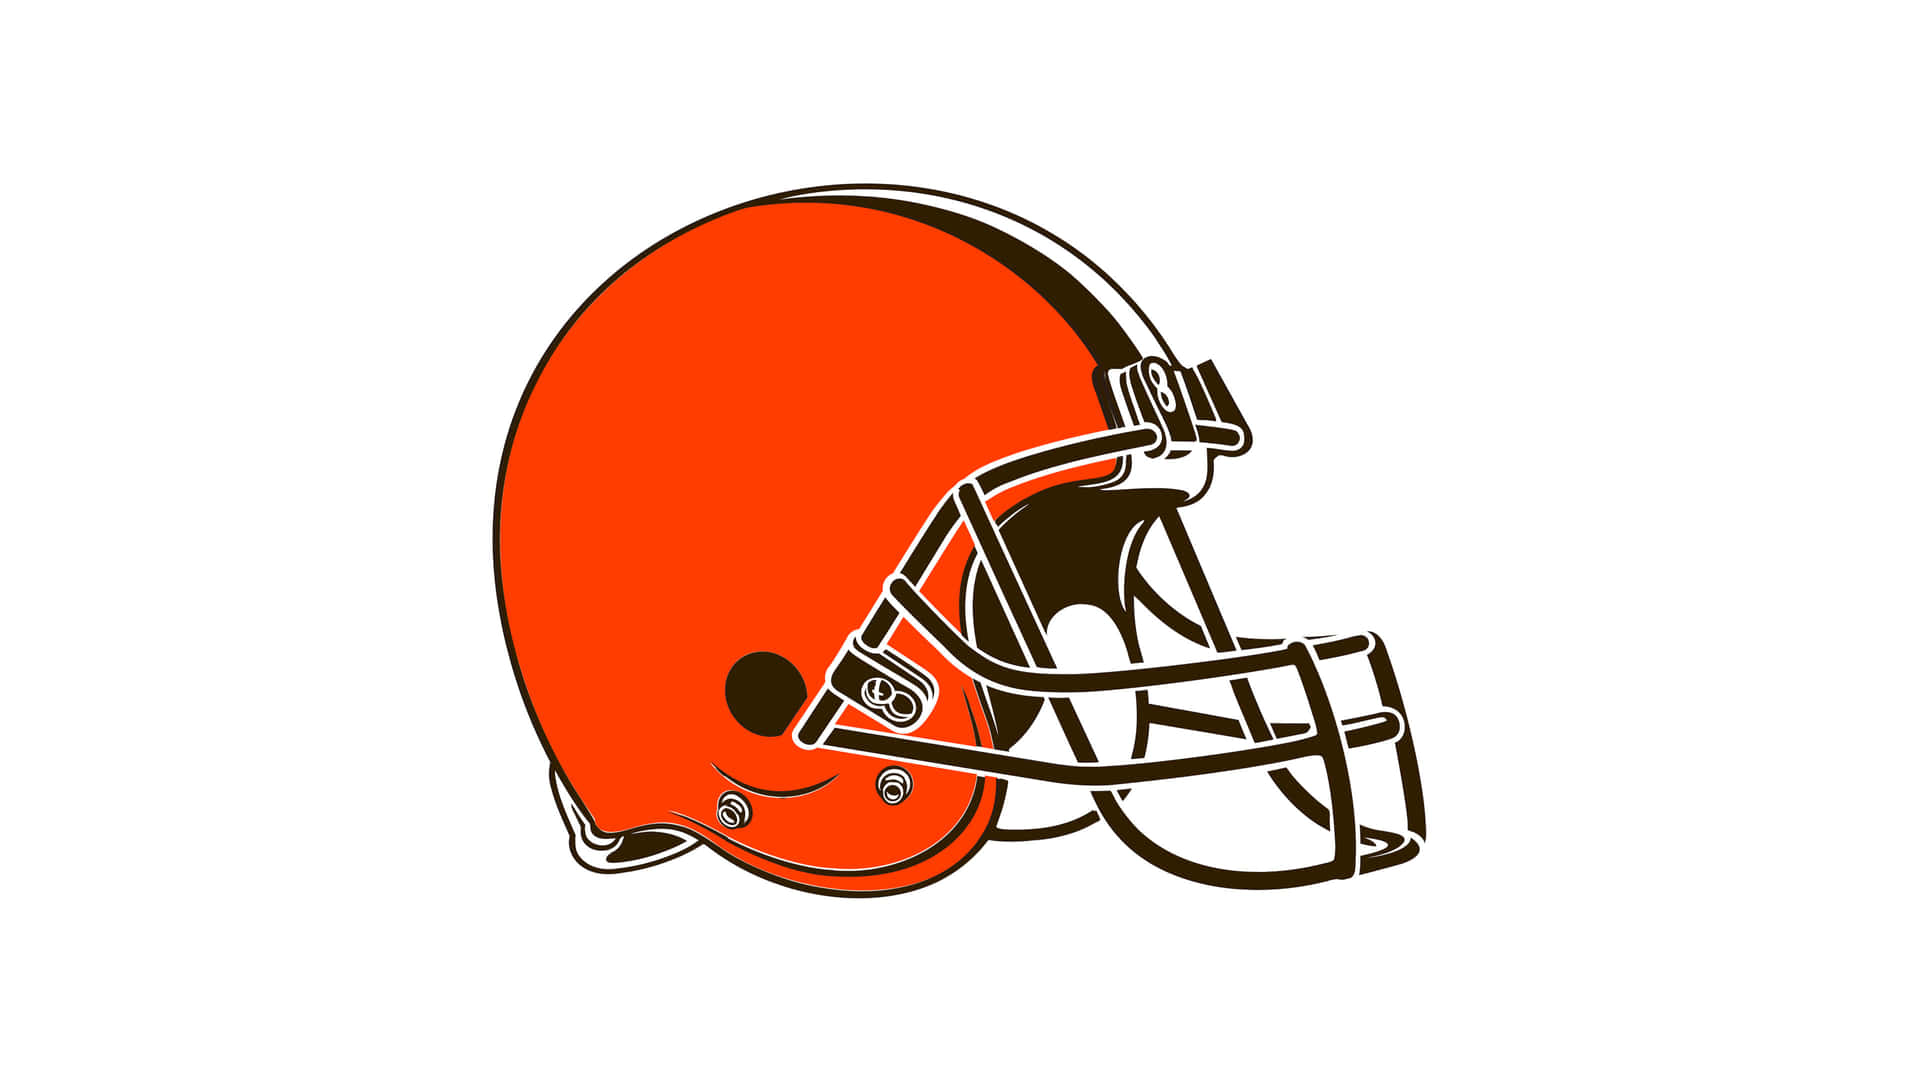 Logo of the Cleveland Browns in National Football League Wallpaper